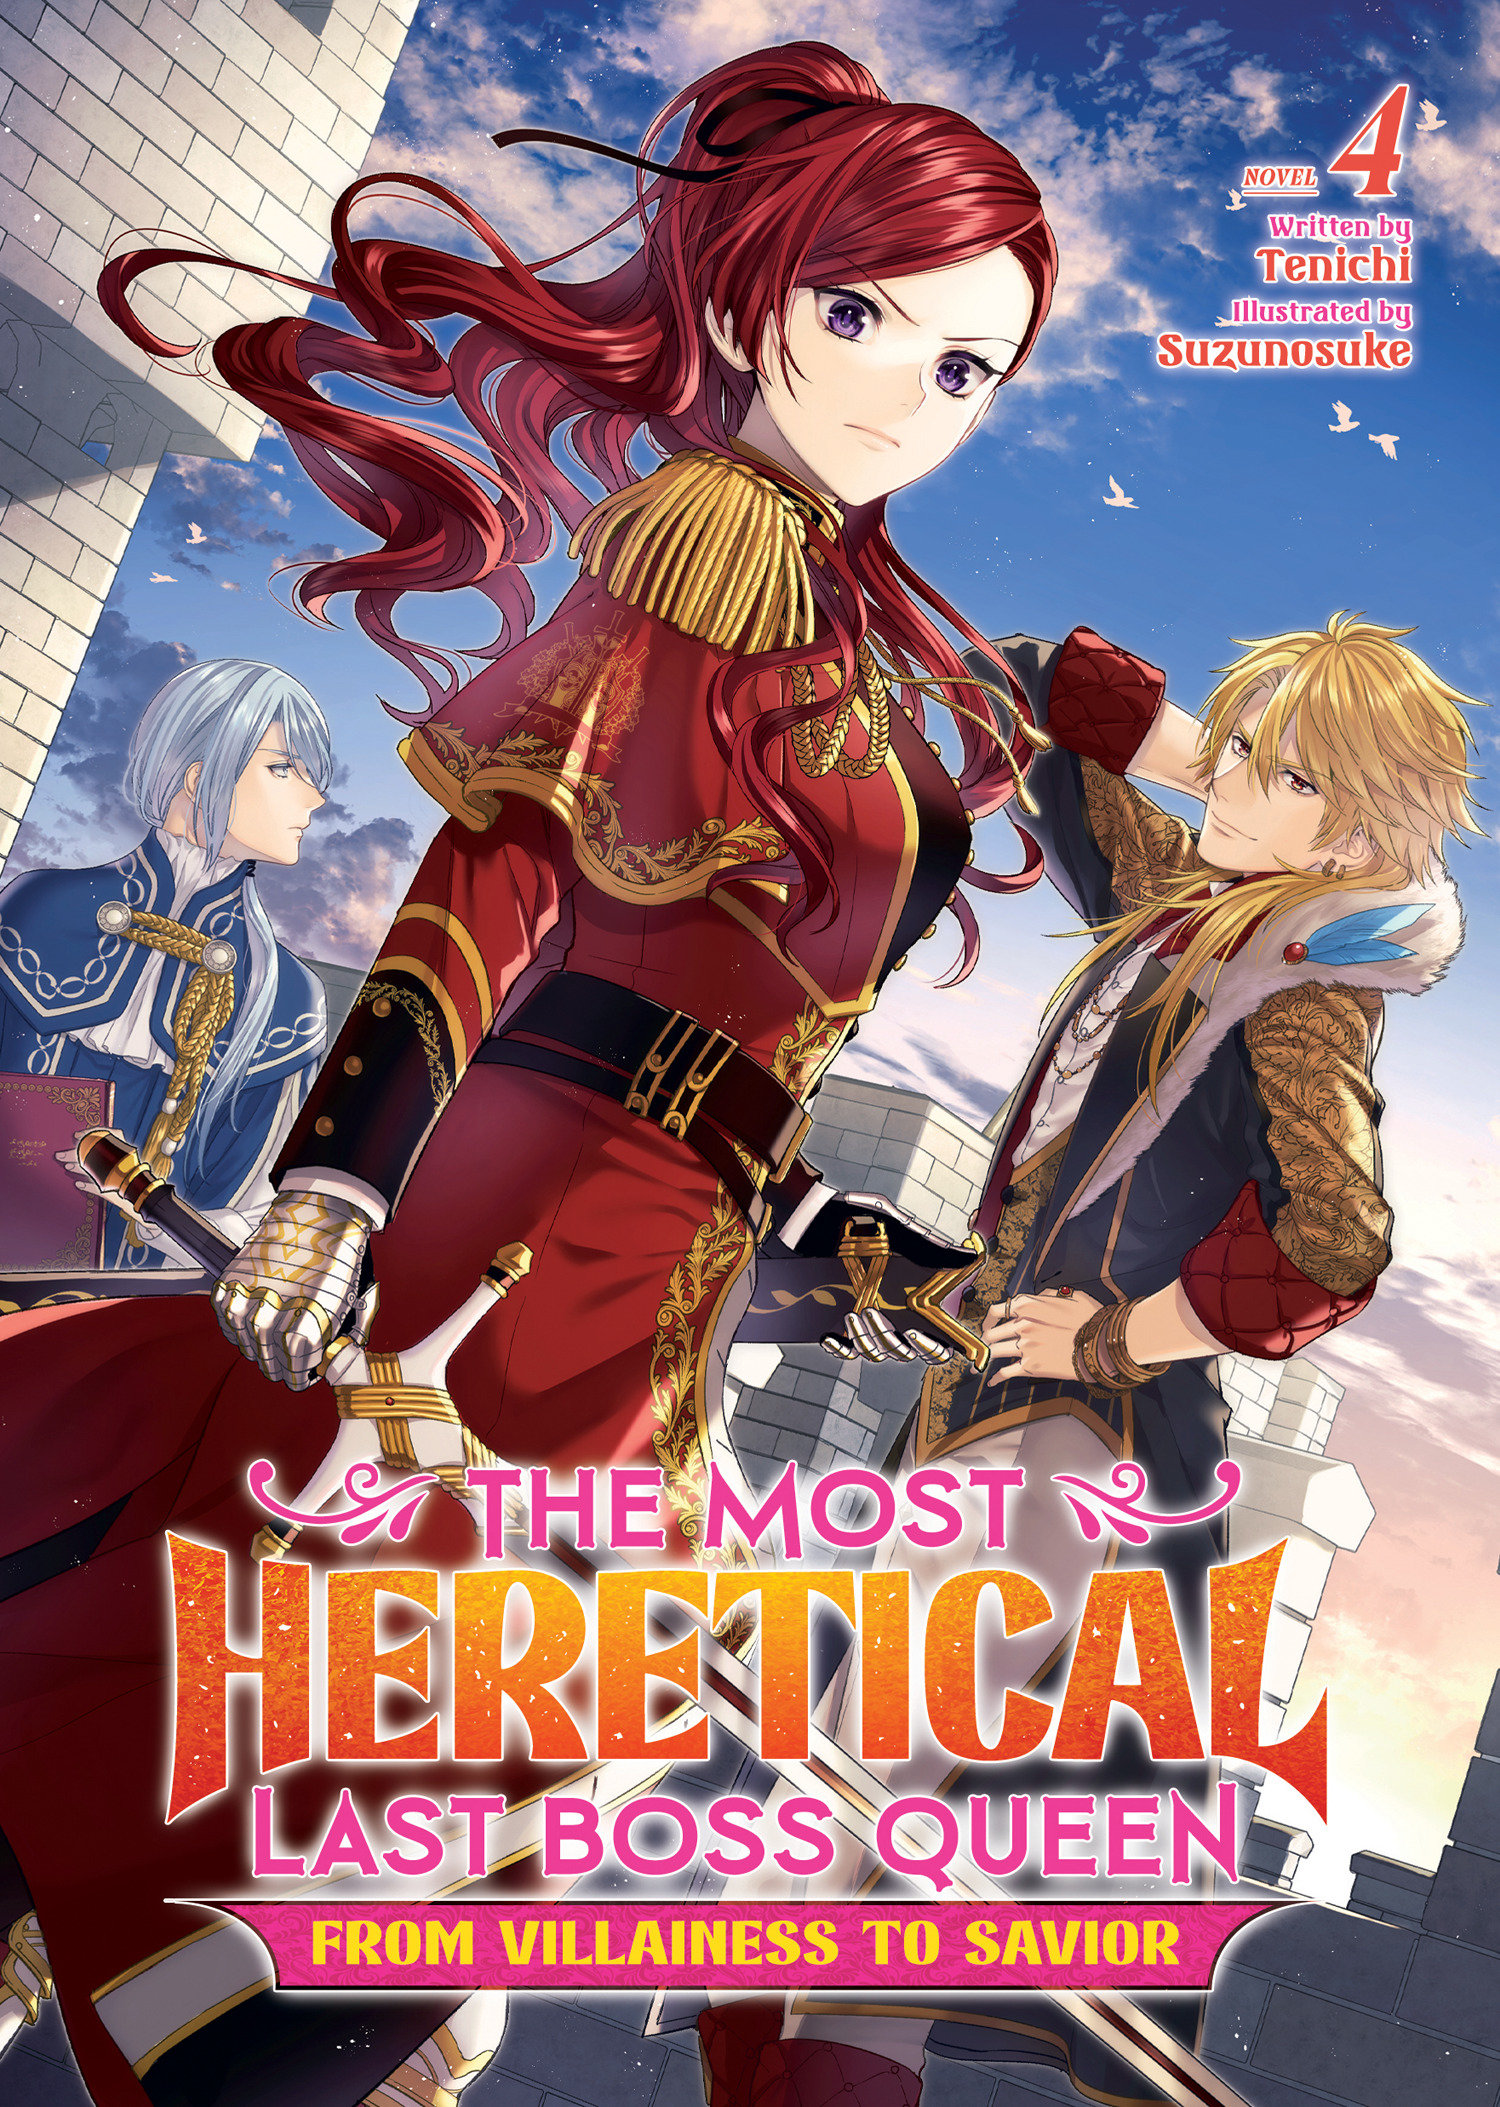 The Most Heretical Last Boss Queen: From Villainess to Savior (Light Novel) Volume 4